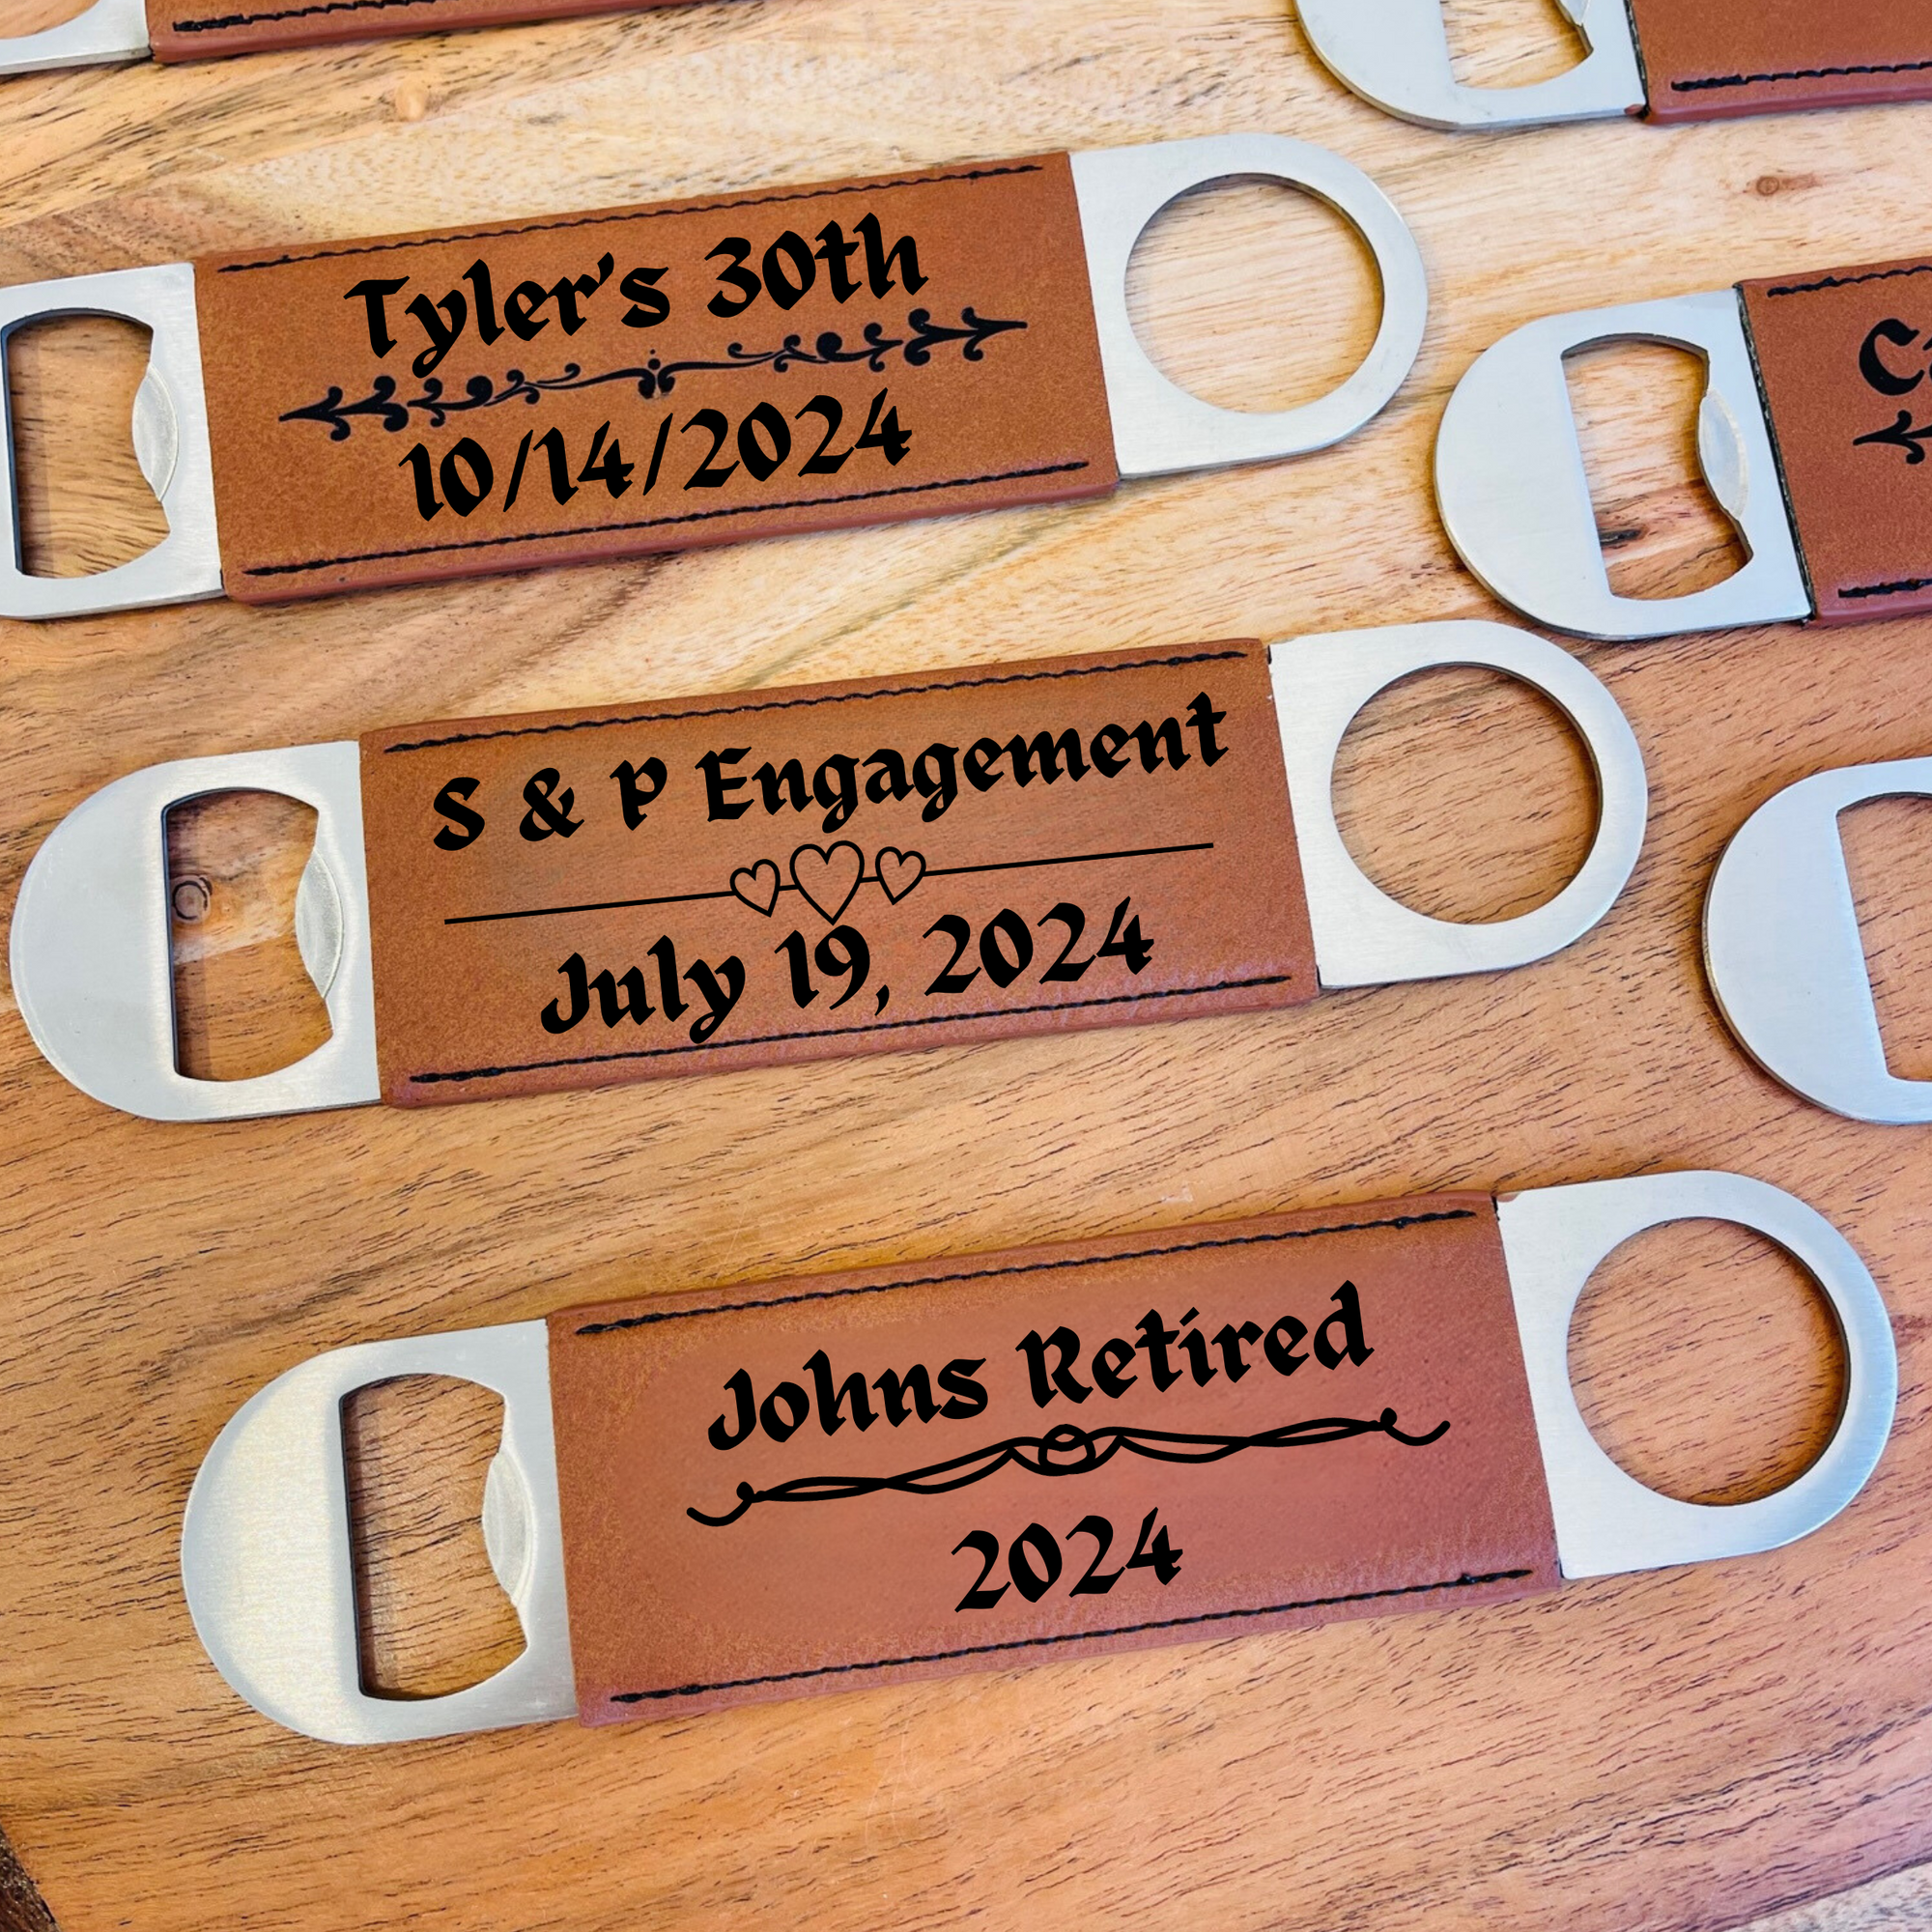 22 Engagement Party Favors That Are Memorable & Affordable